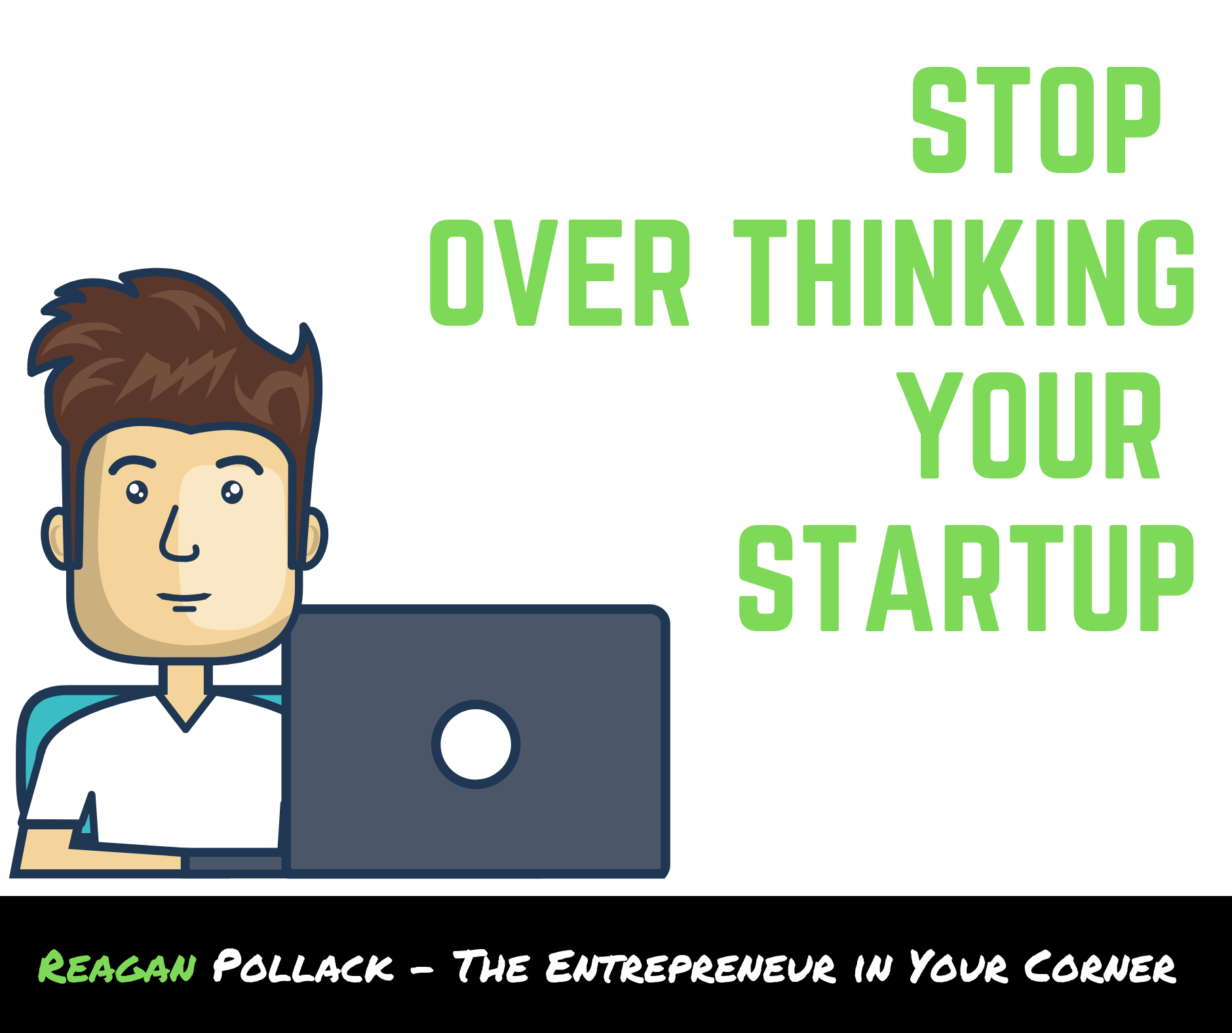 How to stop overthinking your startup - Reagan Pollack - Entrepreneur